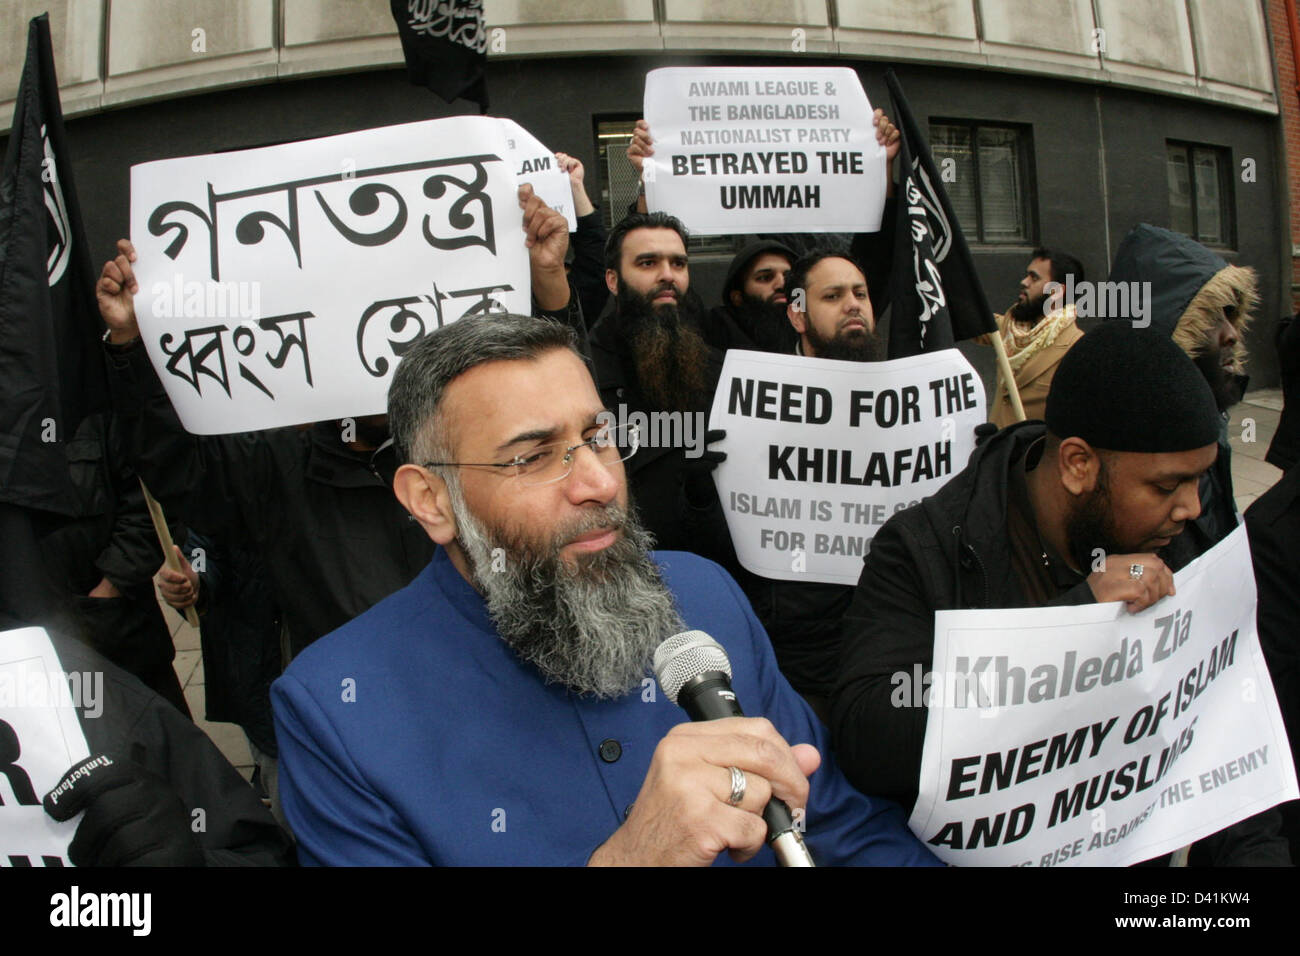 London, UK. 1st March 2013. Anjem Choudary's speaks at the Bangladesh High Commission in London where a group of around 40 muslims protest to expose their alleged perception of Sheikh Hasina's regime's atrocities committed against Muslims. Credit:  martyn wheatley / Alamy Live News Stock Photo